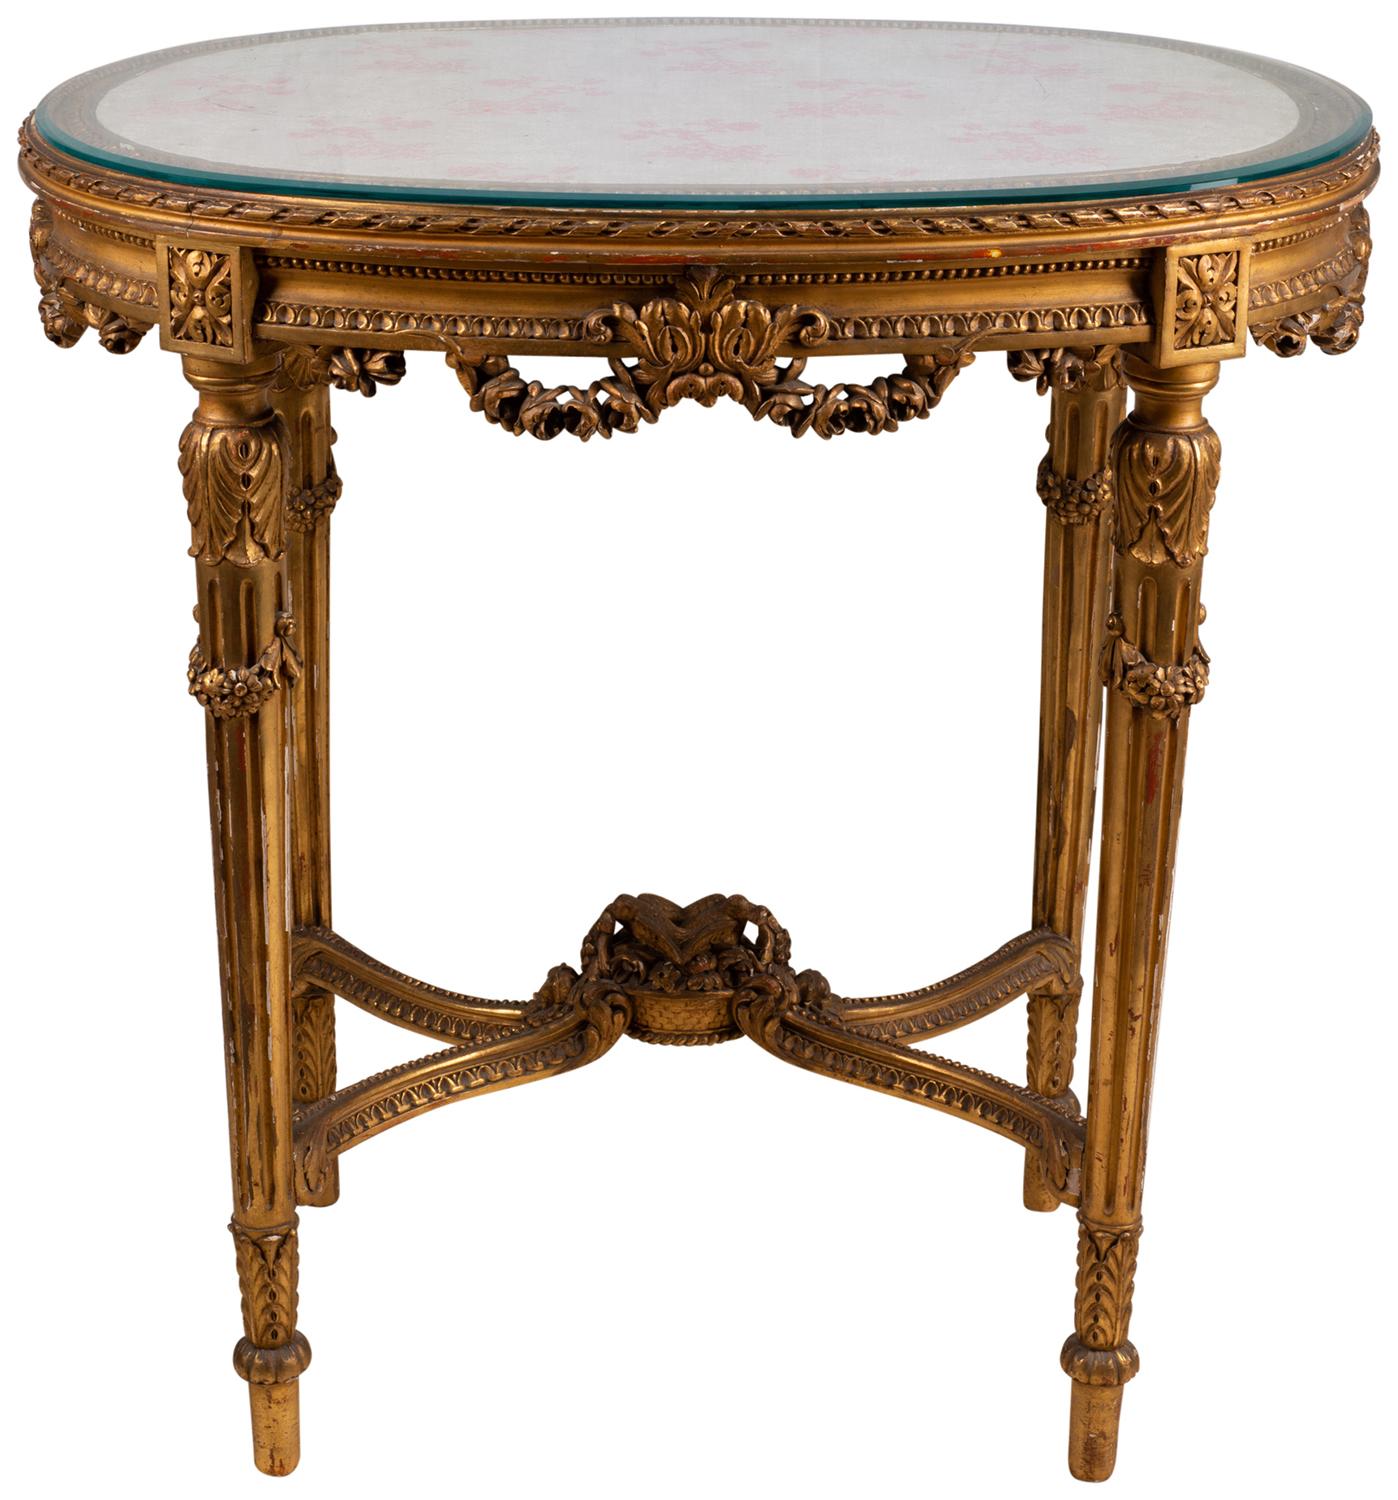 A good quality early 20th century carved giltwood occasional table, having an inset silk panel with glass top. A carved frieze with garlands of flowers, egg and dart molding, raised on turned tapering fluted legs, also with carved floral decoration